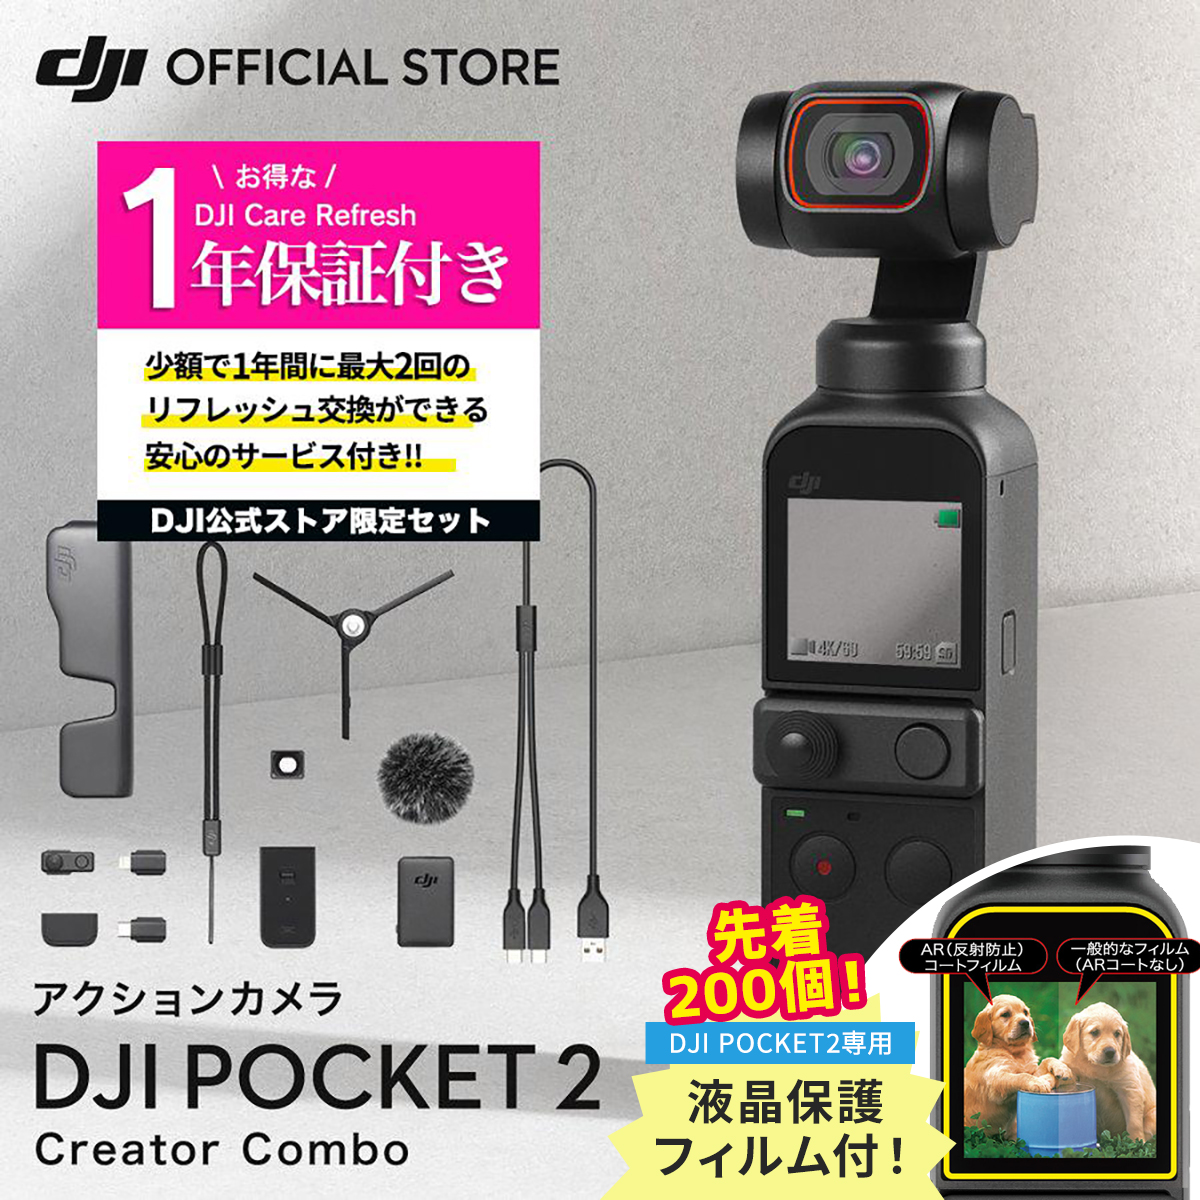 OUTLET 包装 即日発送 代引無料 DJI OSMO ACTION 正規品 保証付き